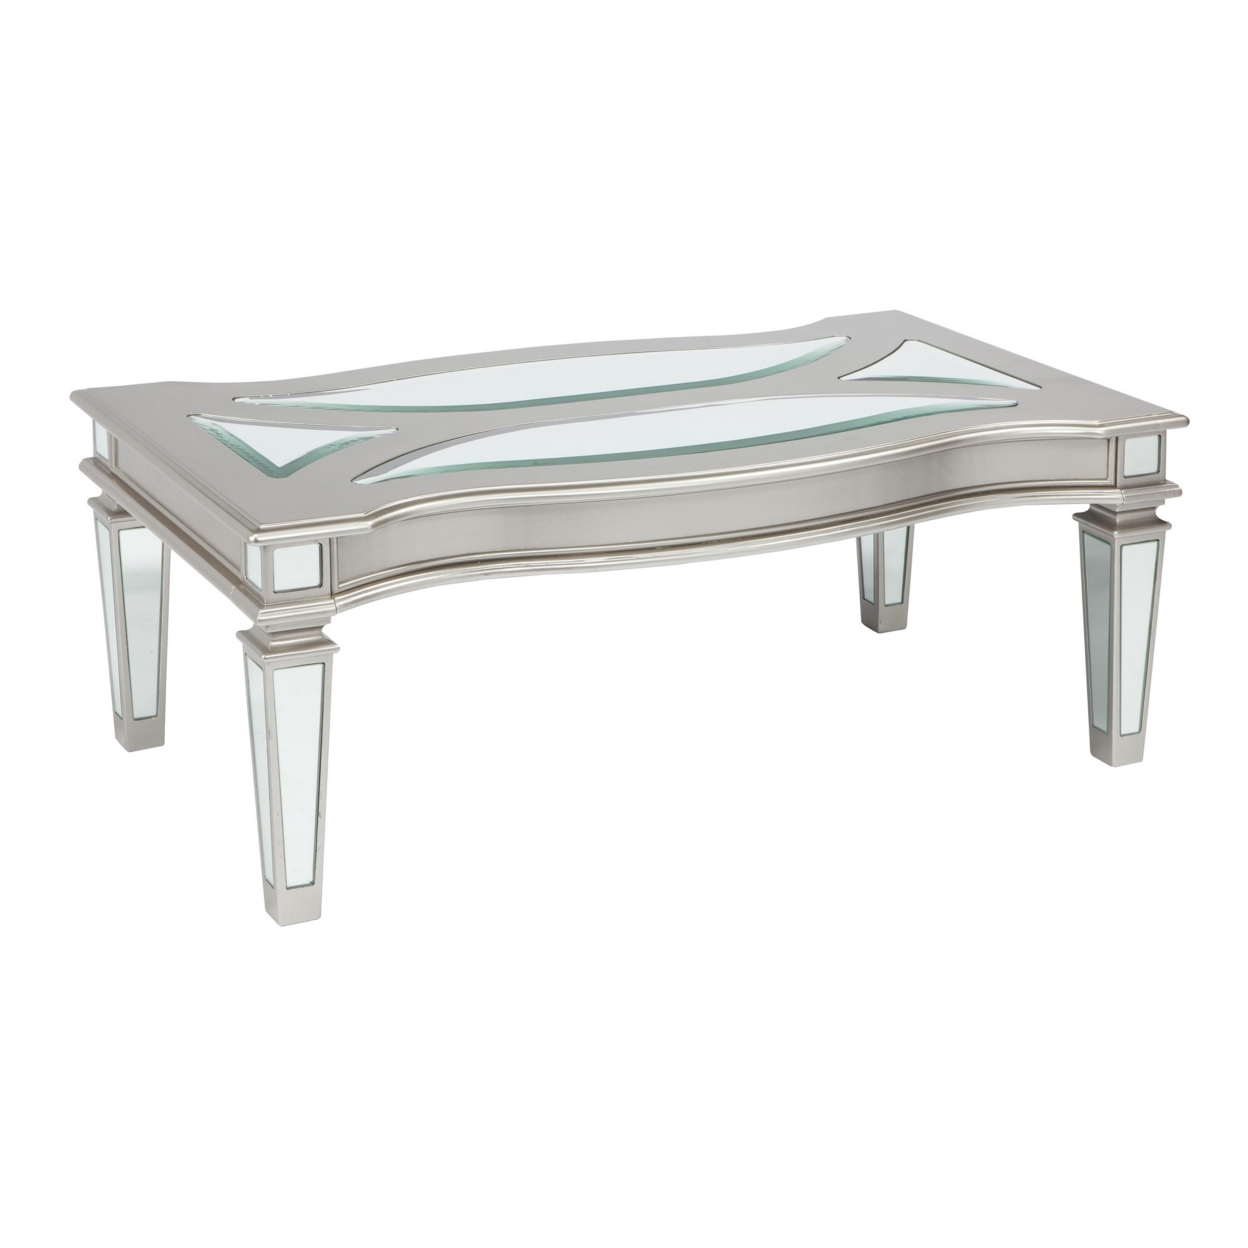 Rectangular Wooden Cocktail Table With Mirror Inserts, Silver- Saltoro Sherpi